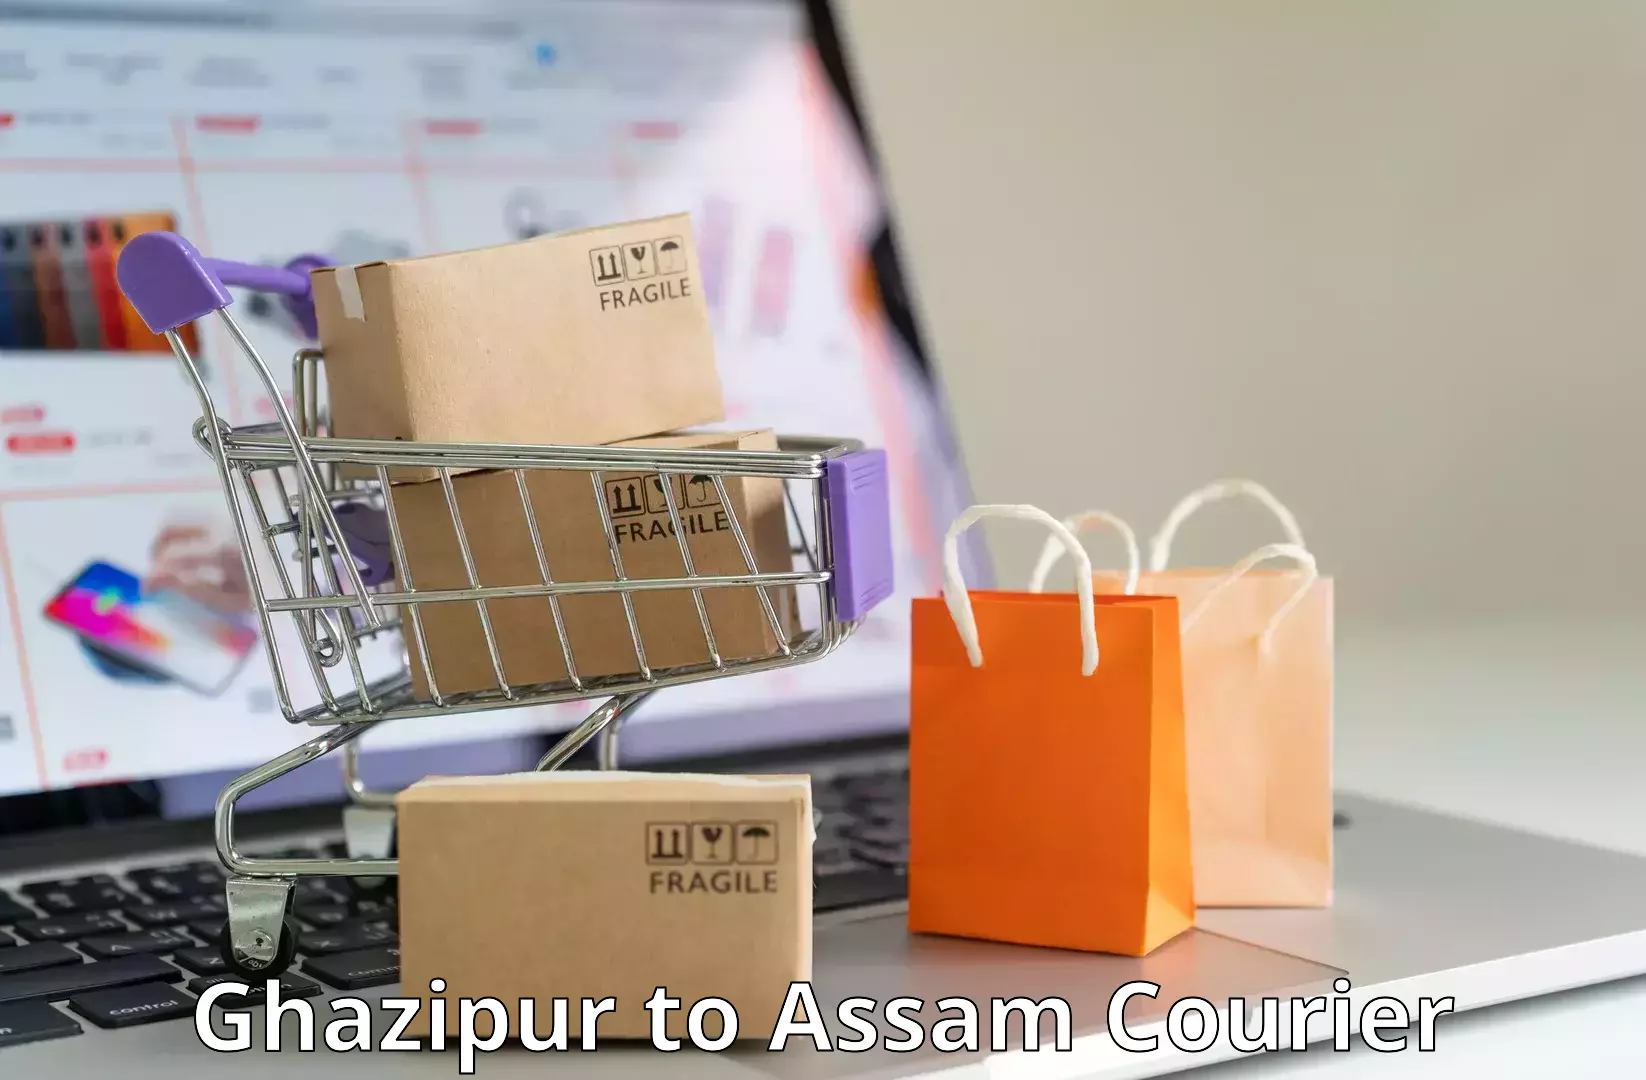 State-of-the-art courier technology Ghazipur to Dehurda